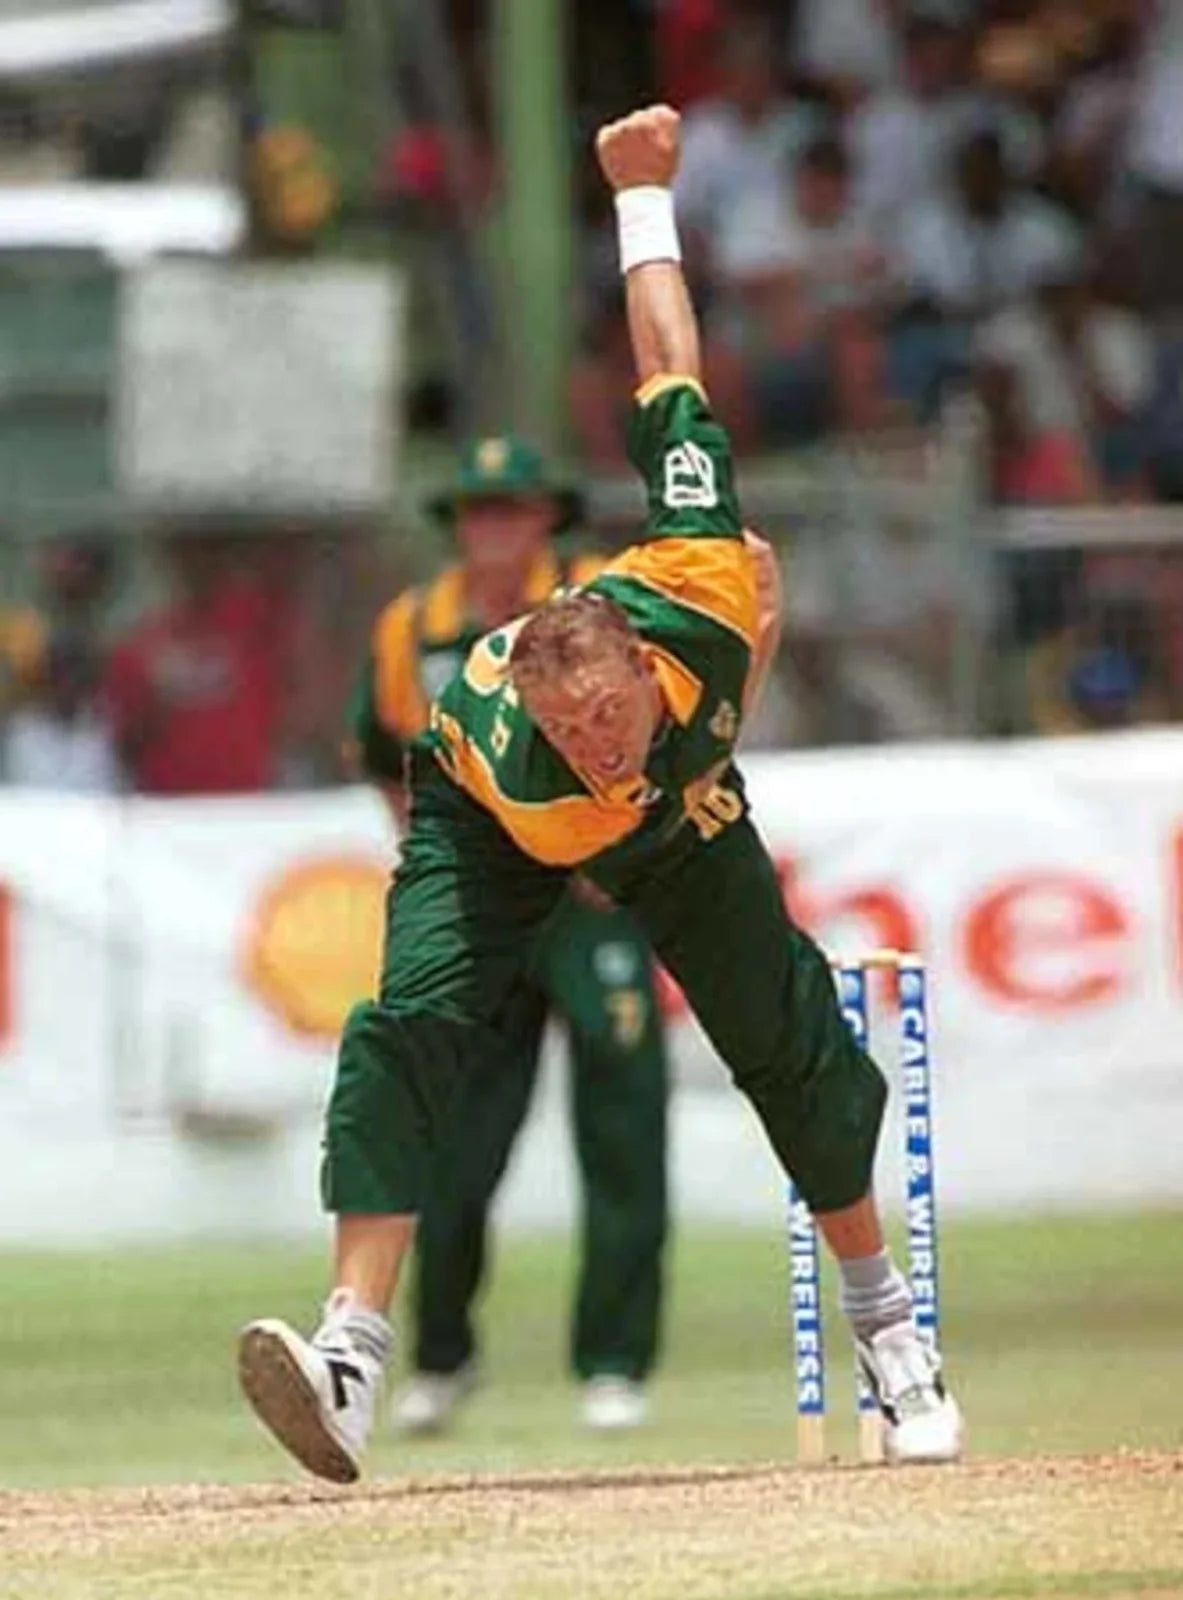 Allan Donald bowls a delivery